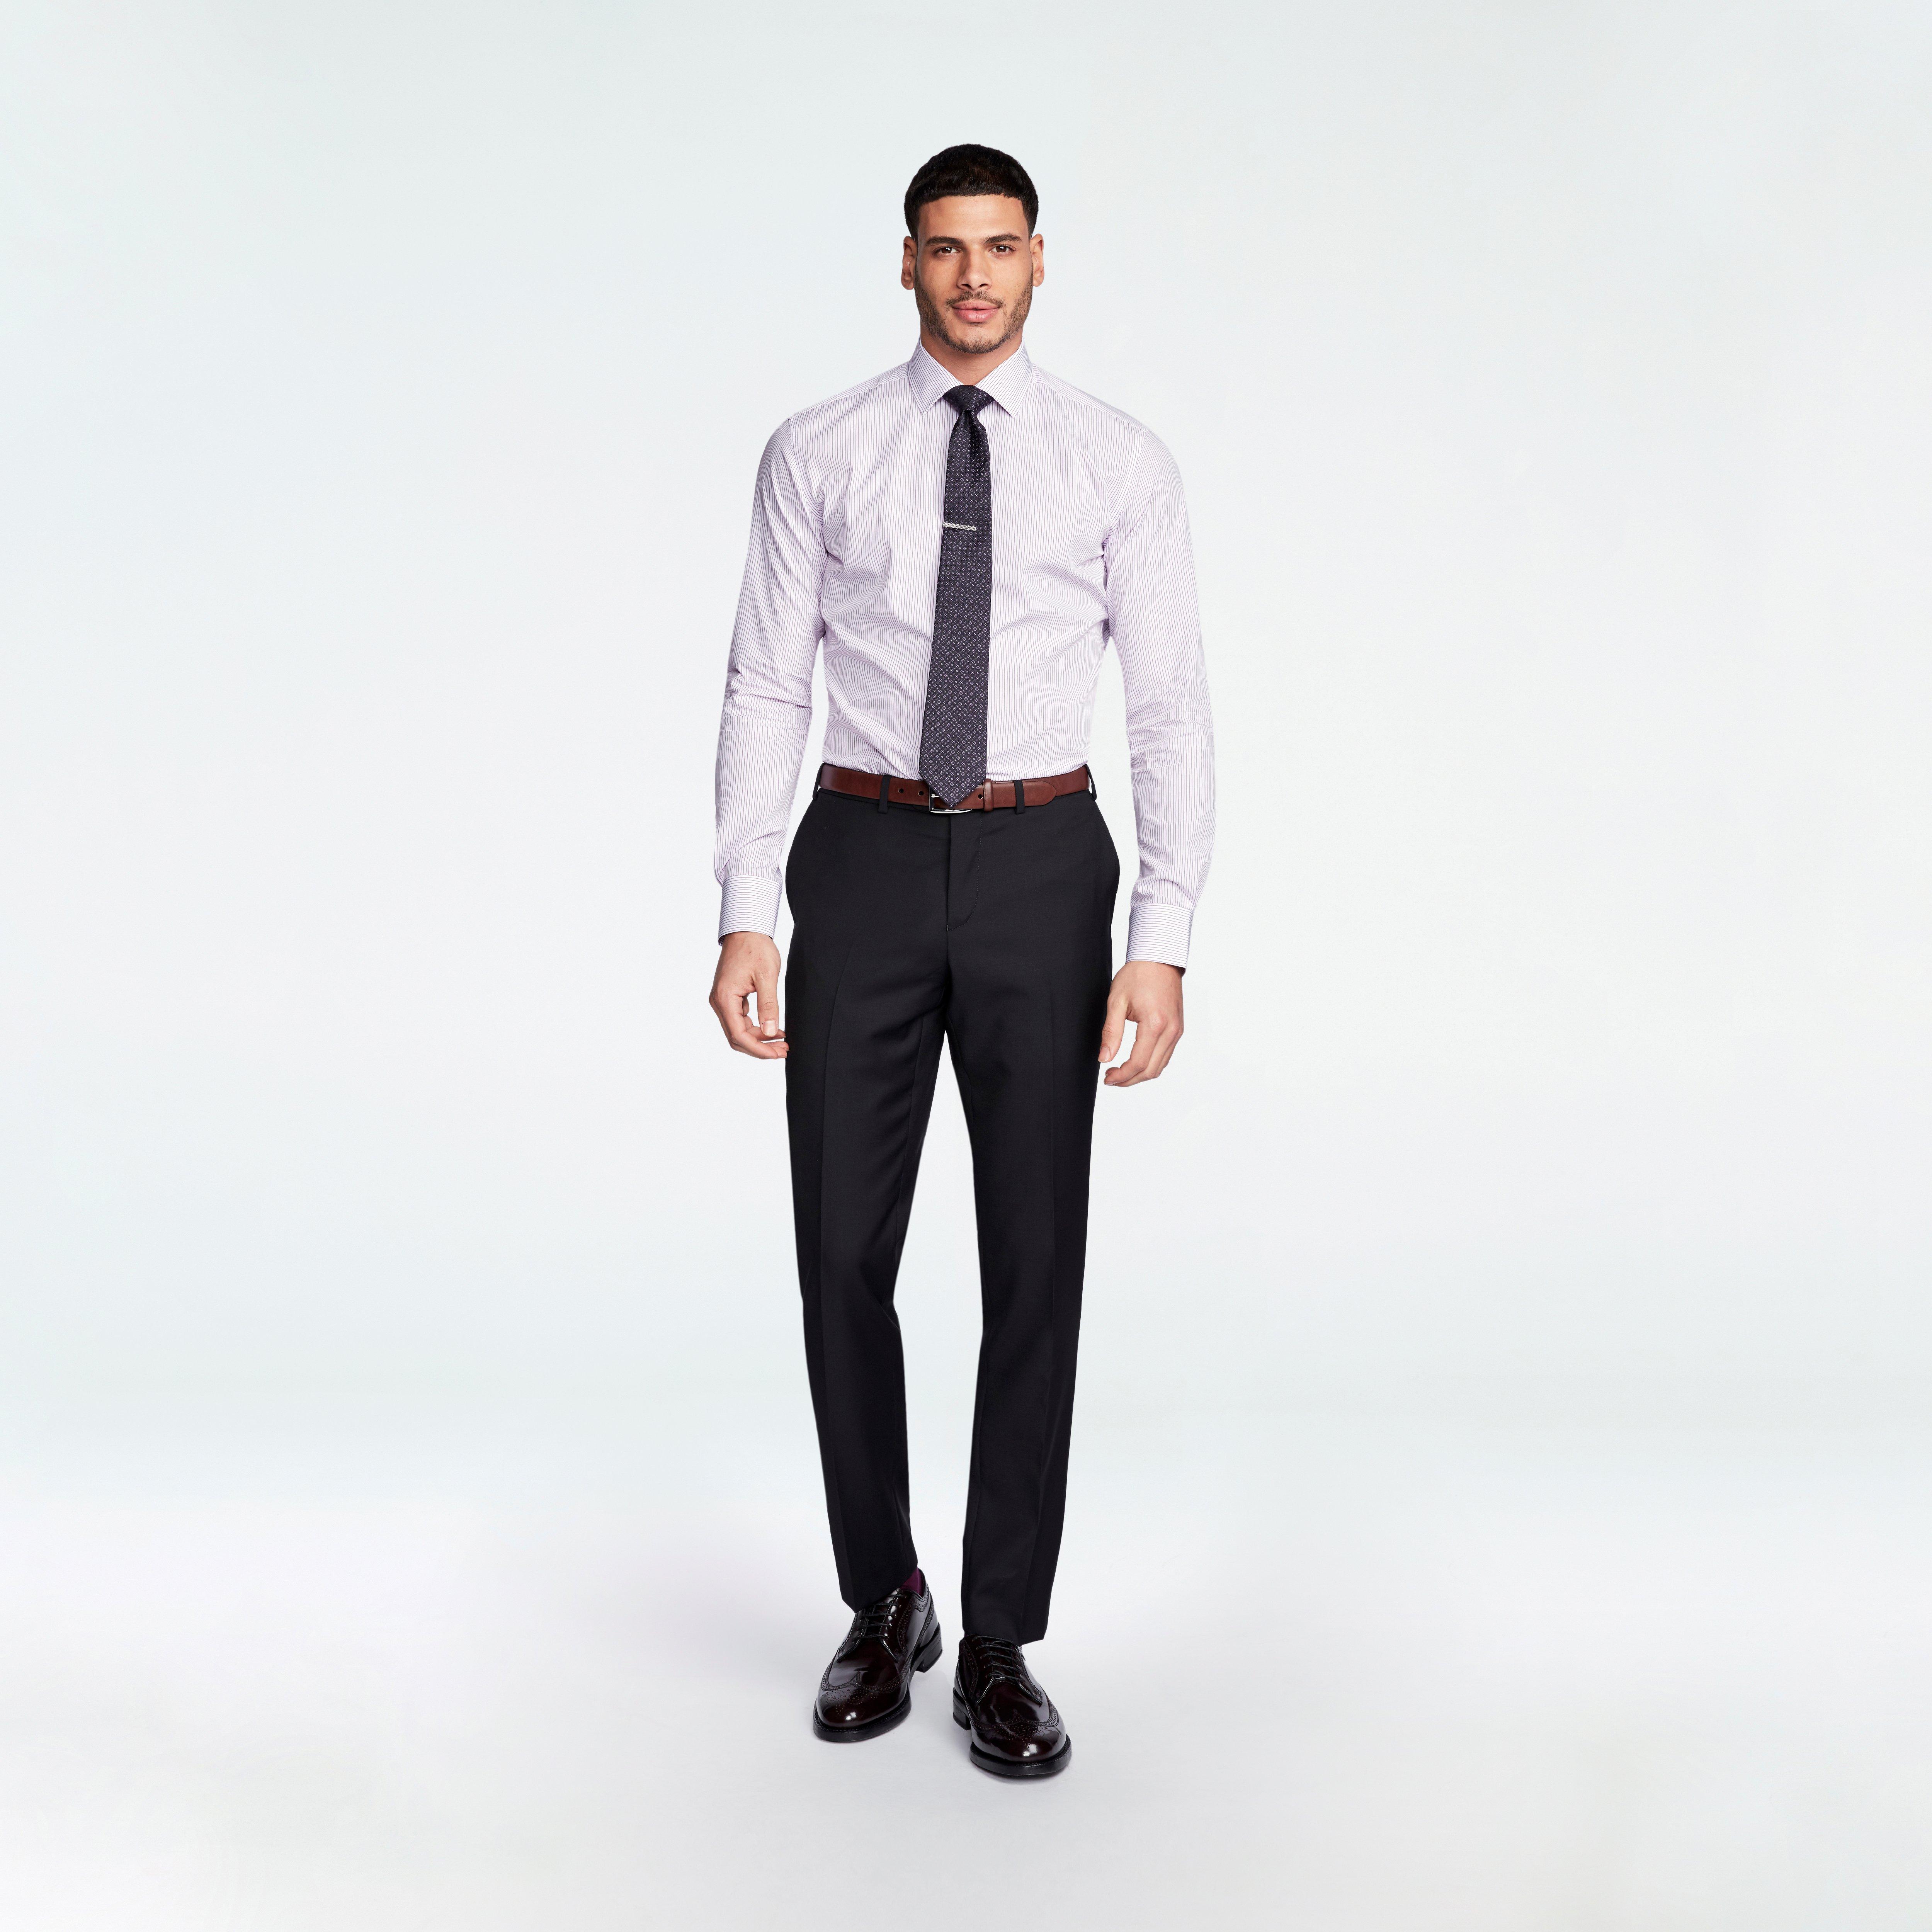 Custom Suits Made For You - Hemsworth Black Suit | INDOCHINO